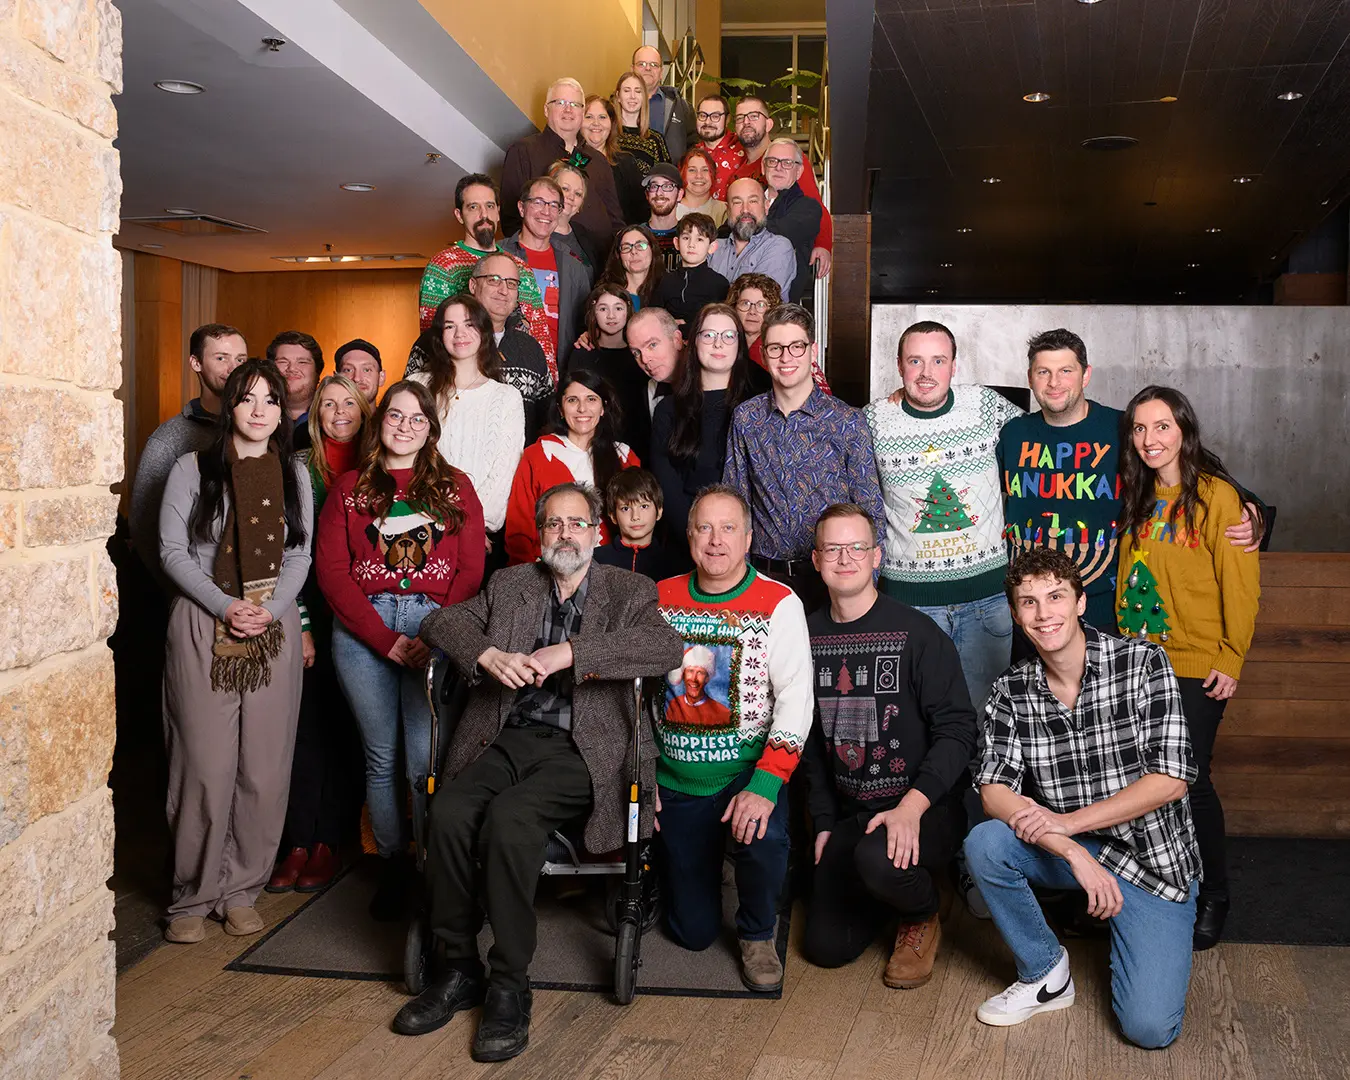 The AVentPro team at this year's holiday party!